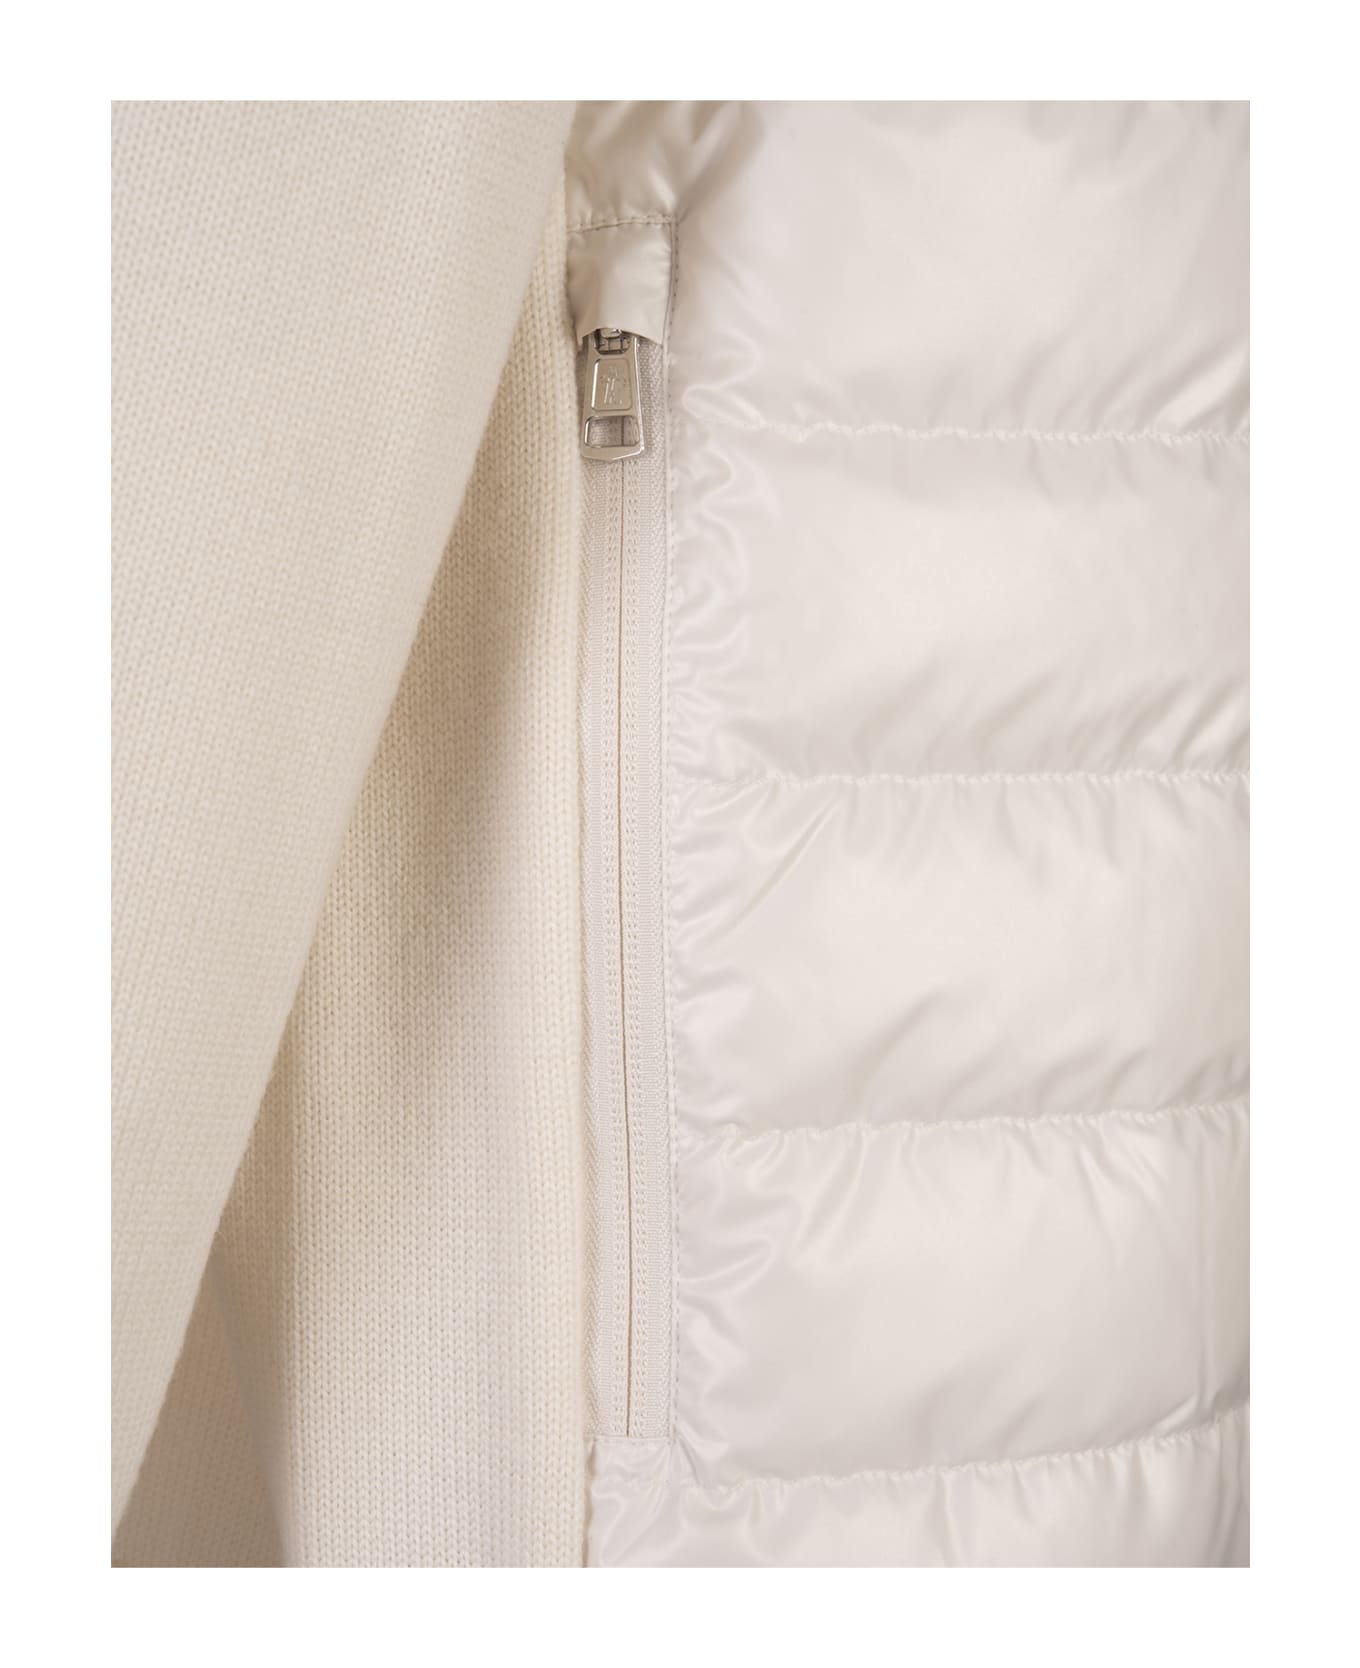 Moncler Padded Tricot Cardigan With Hood In White And Navy Blue - White